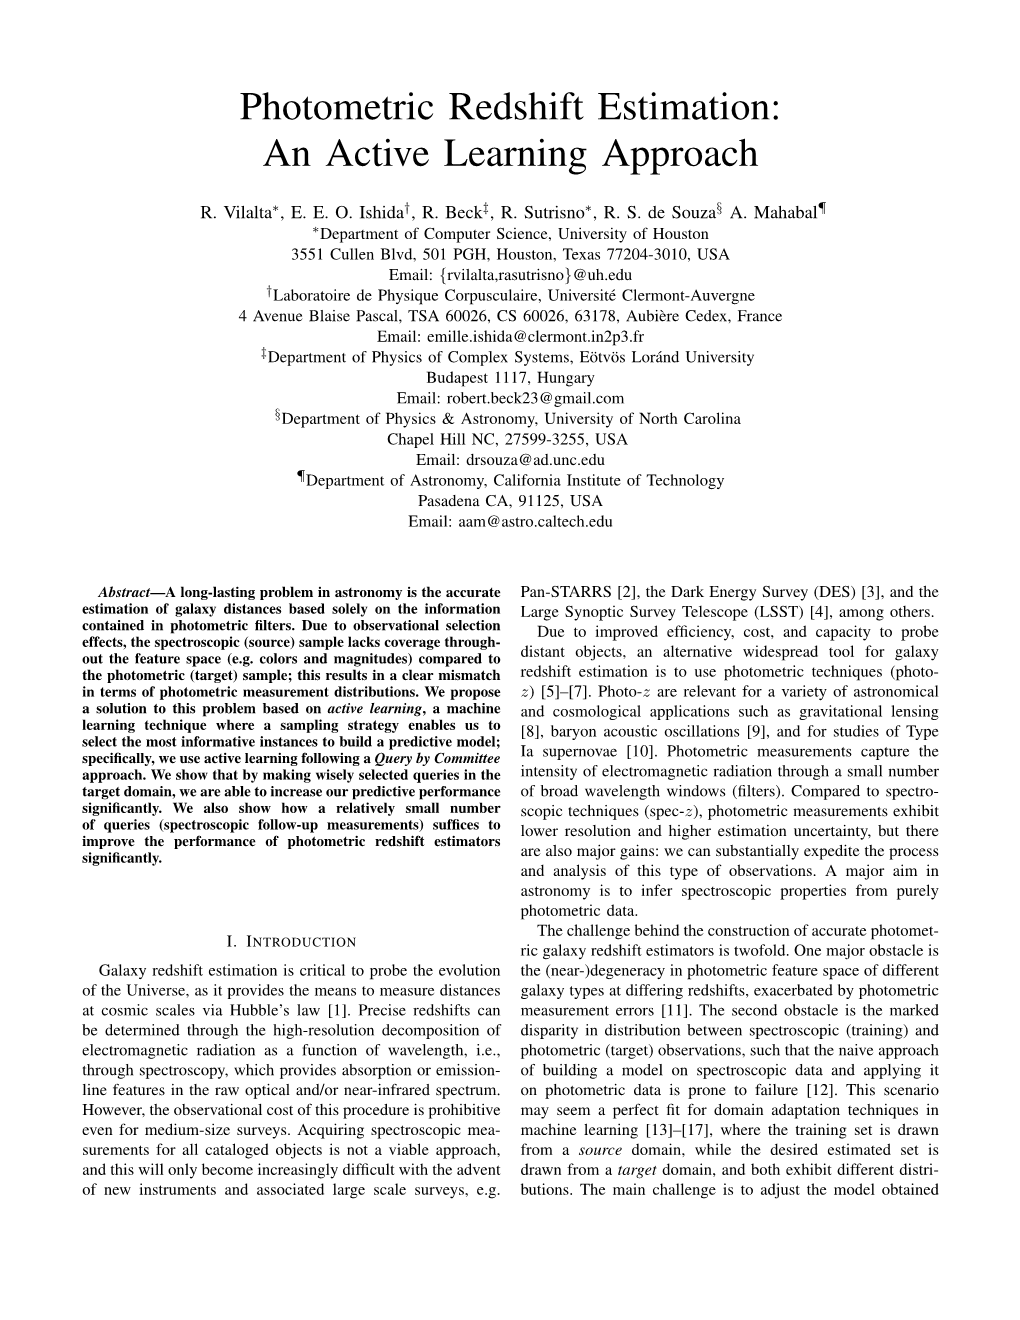 Photometric Redshift Estimation: an Active Learning Approach